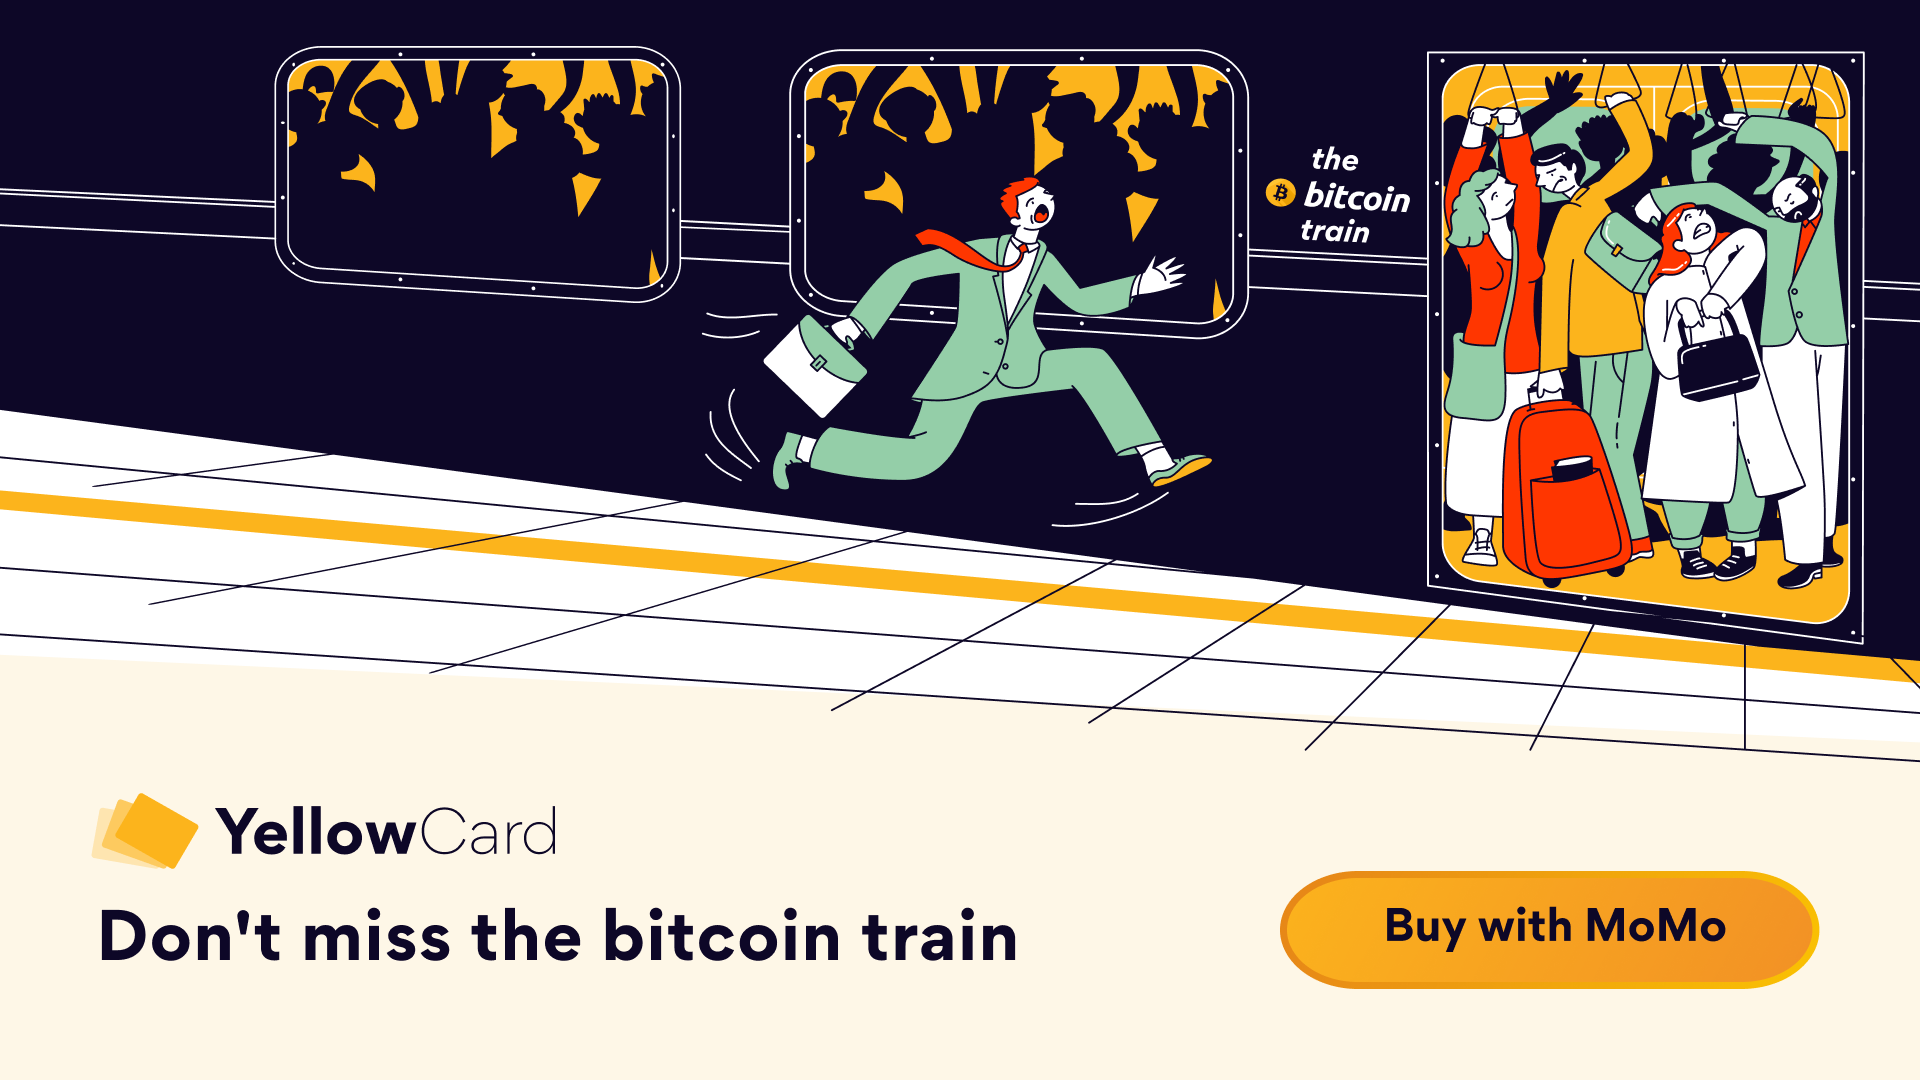 Bitcoin is for everyone - Why don’t you get started with Yellow Card